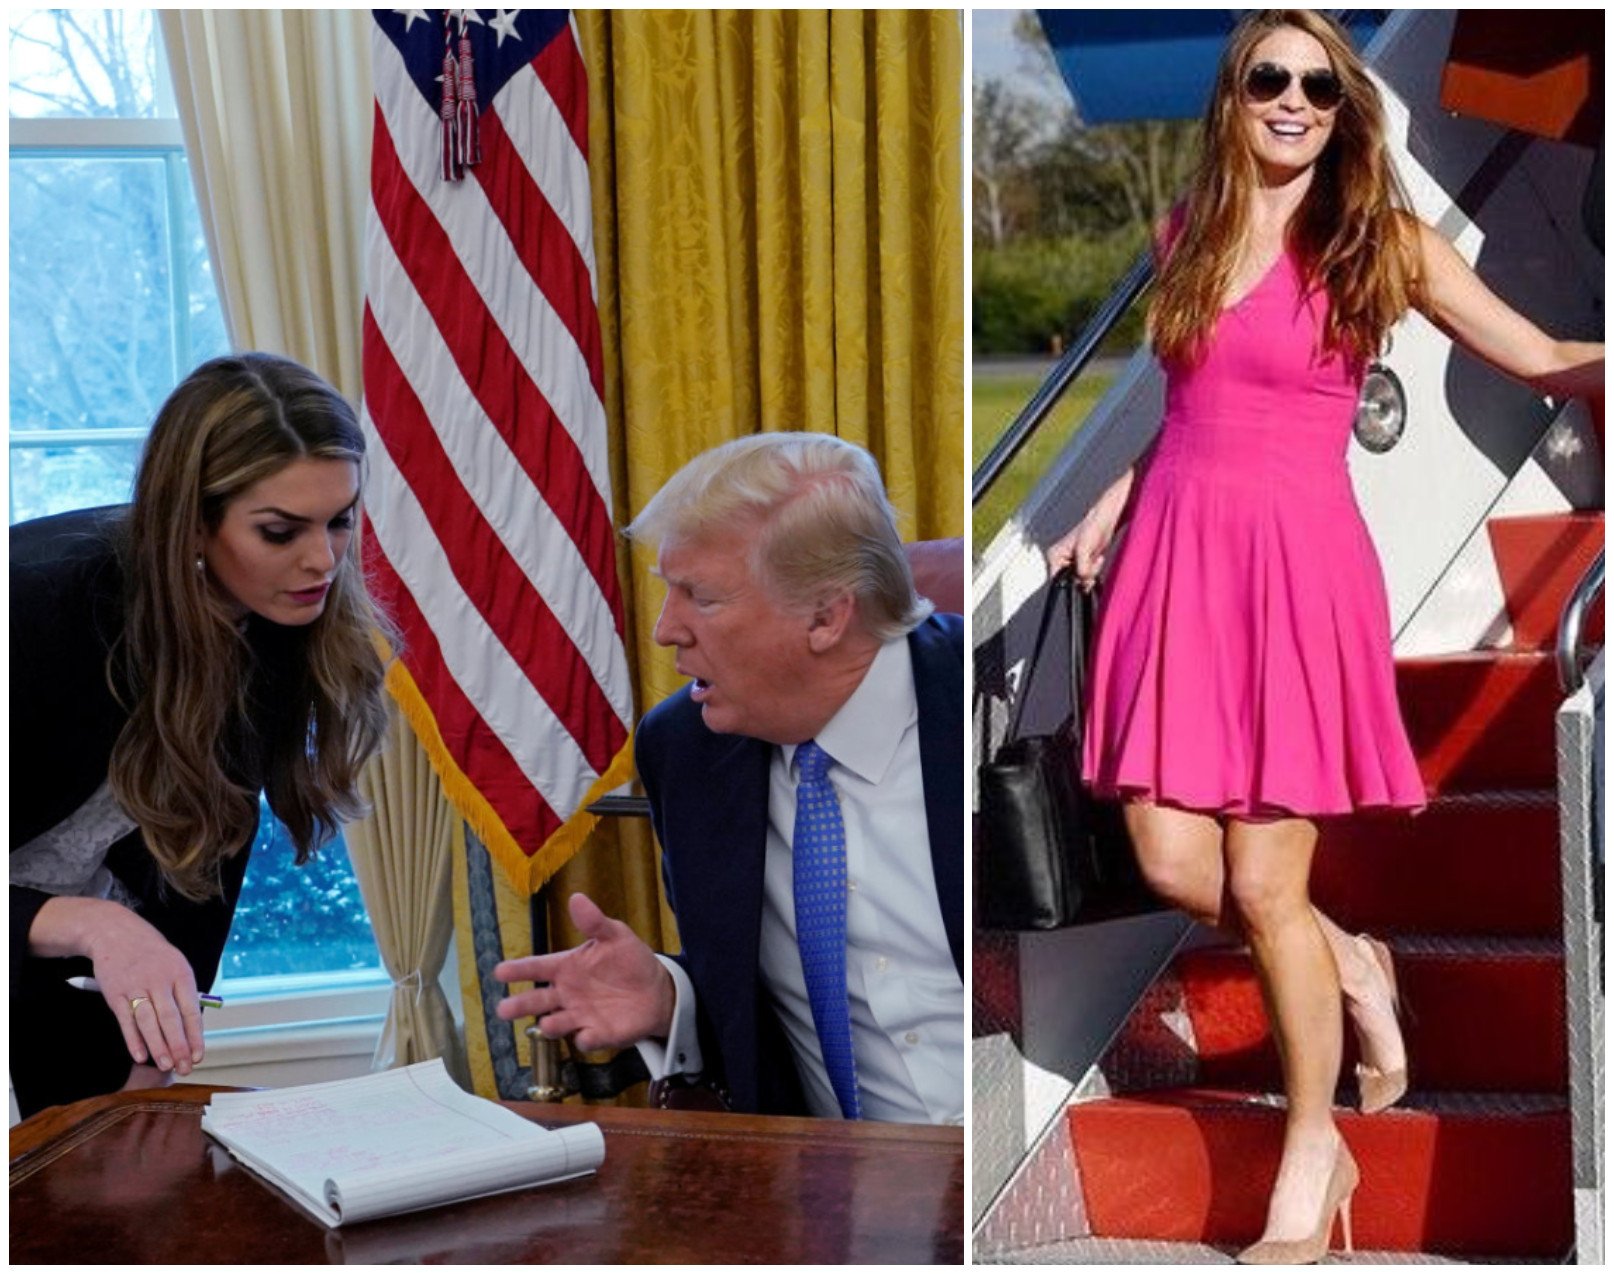 Hope Hicks confers with former President Donald Trump in the Oval Office; Hicks steps off a plane in a bright pink sundress. Photos: Reuters, @hopehicksfanpage/Instagram